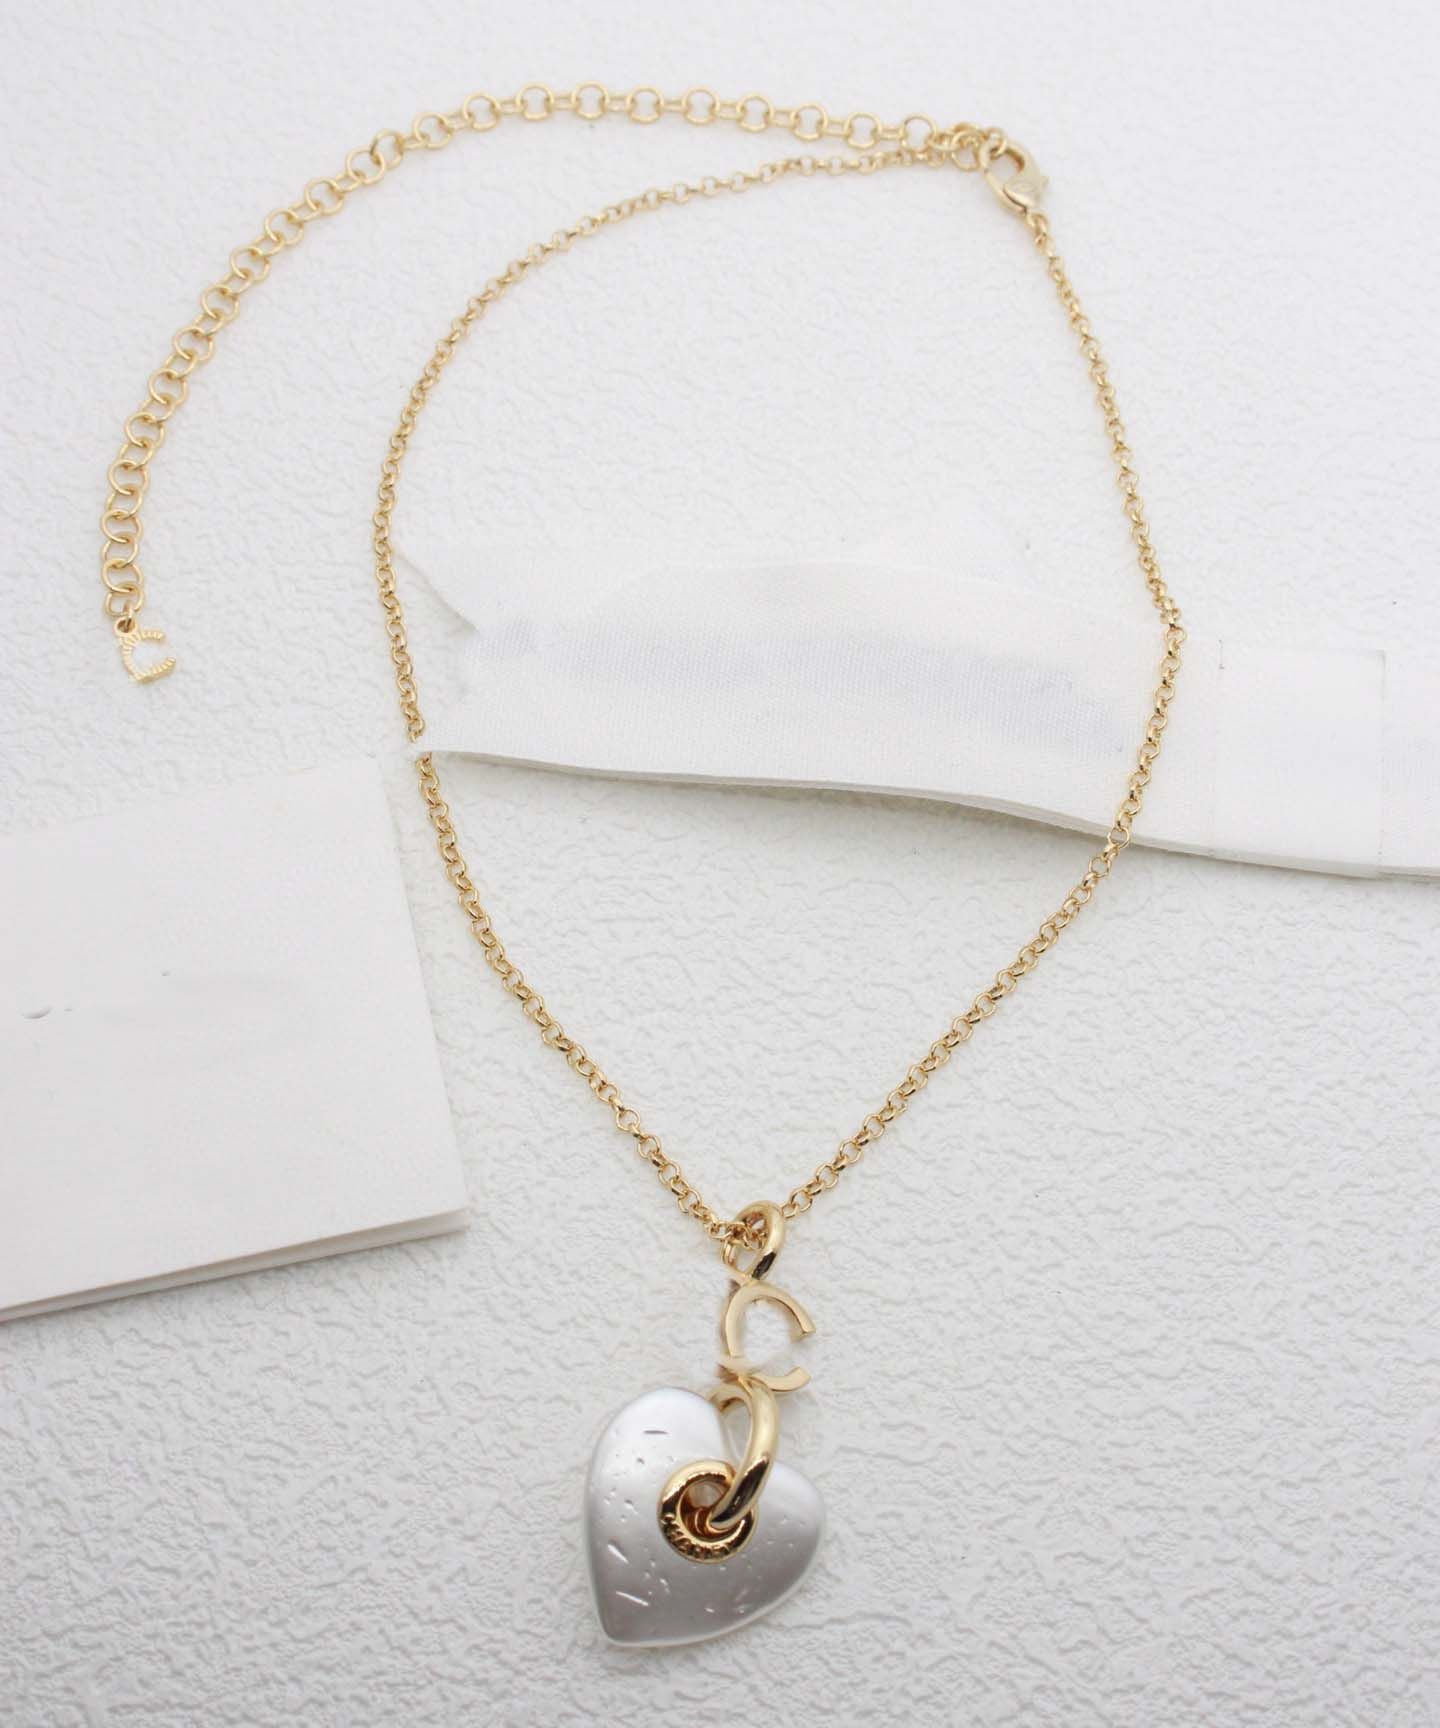 001 necklace+BOX